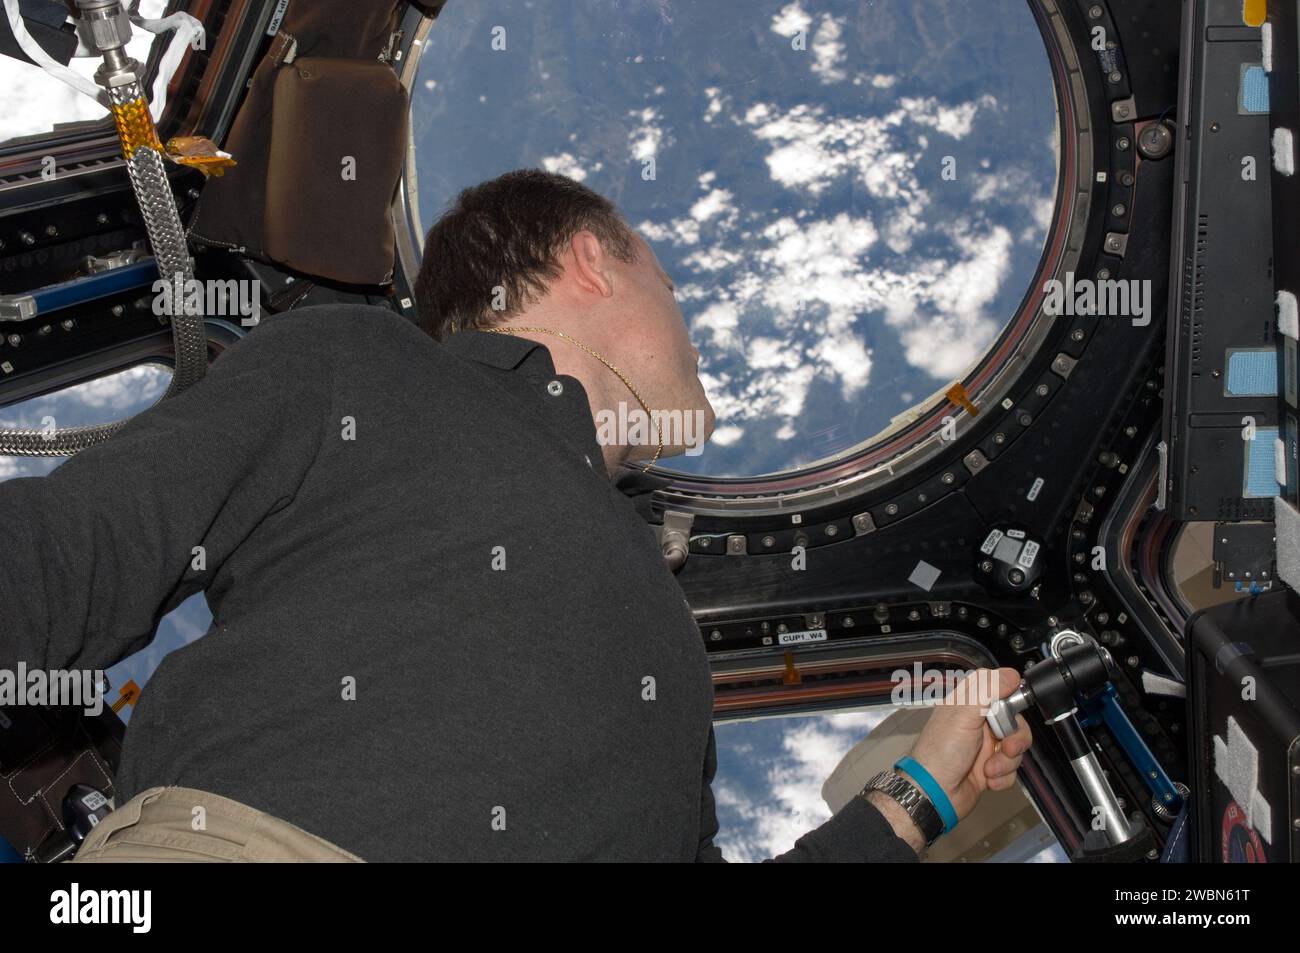 ISS028-E-048060 (11 Sept. 2011) --- NASA astronaut Ron Garan, Expedition 28 flight engineer, views a point on Earth through one of the windows in the Cupola of the International Space Station. Stock Photo